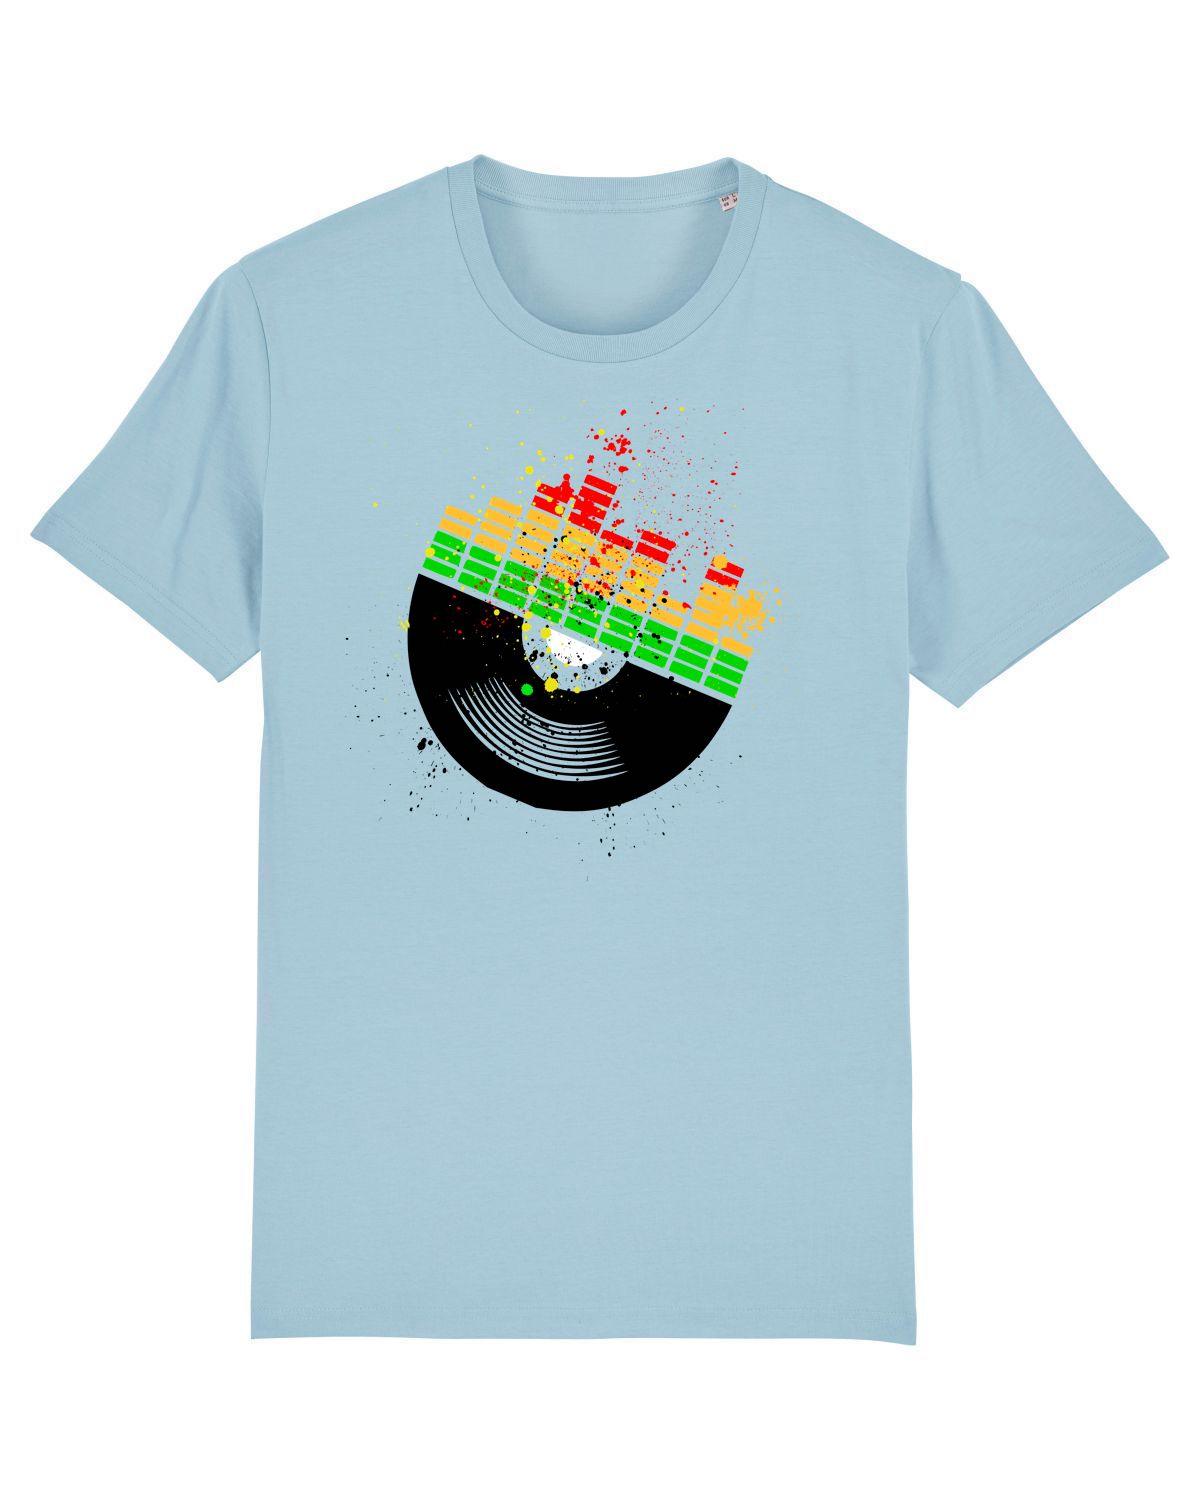 PUMP UP THE VOLUMN: T-Shirt Inspired by DJs and Clubbing (3 Colours) - Suit Yourself Music